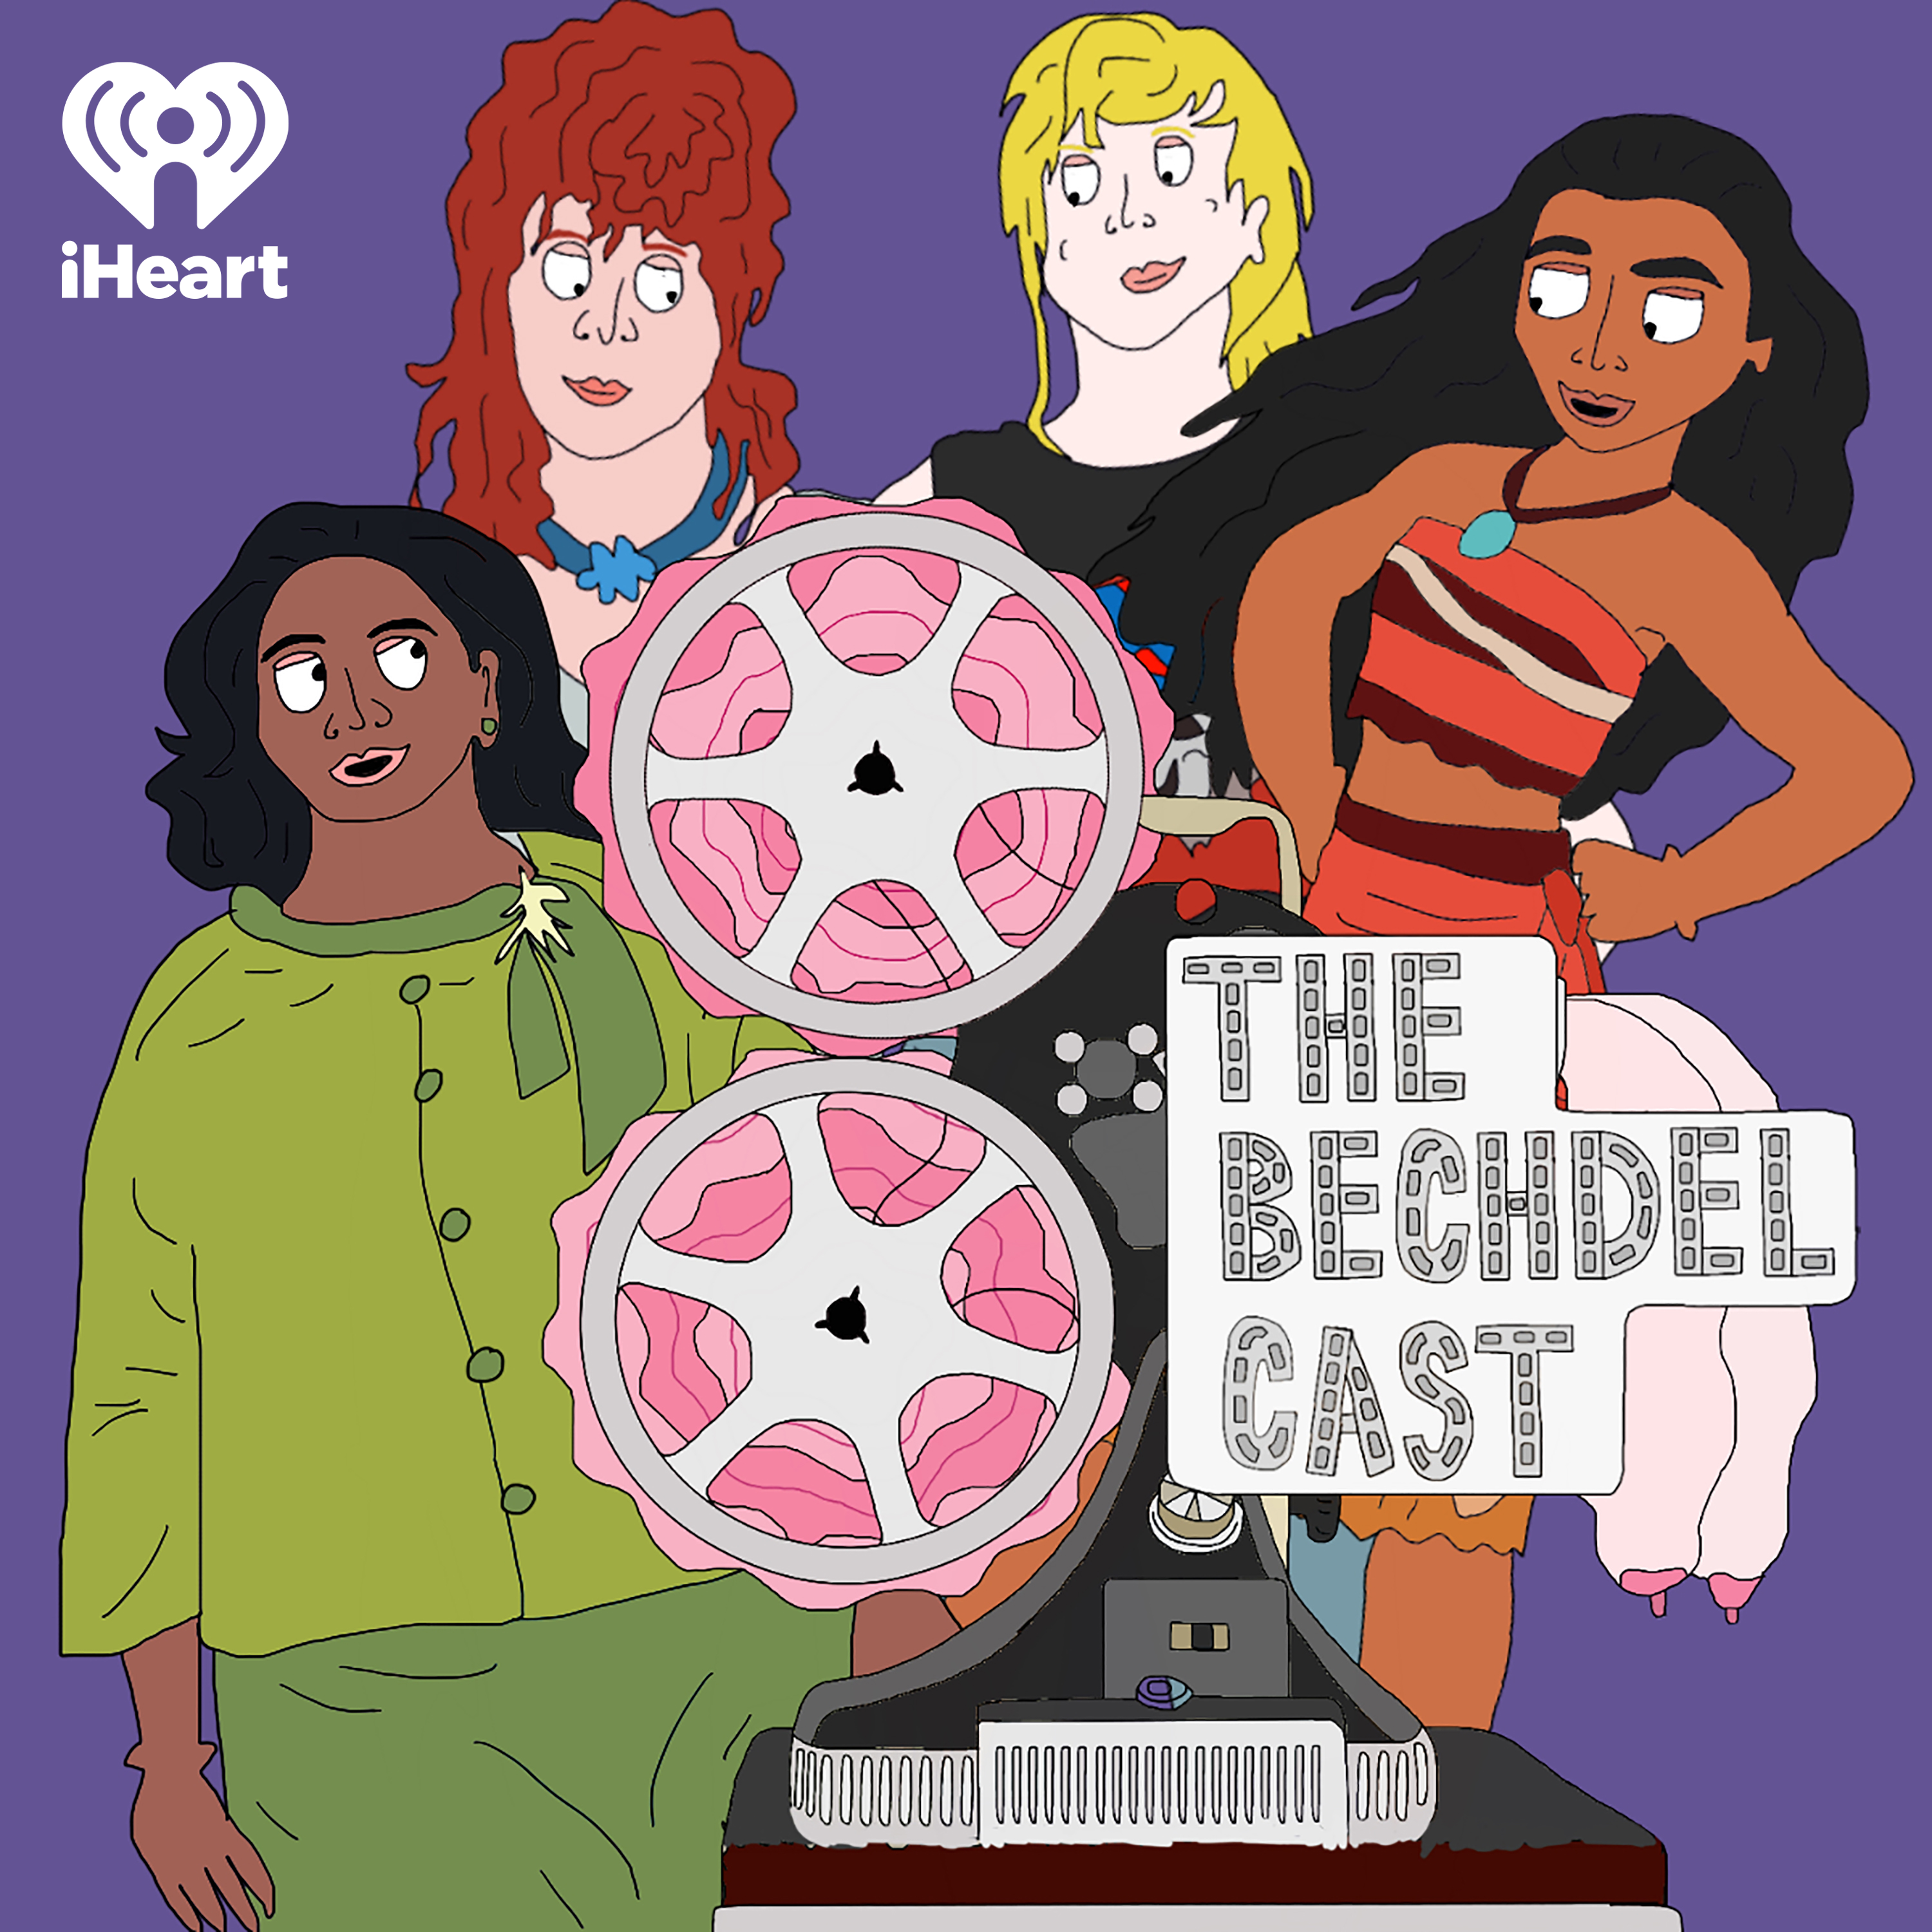 500 Movies of Bechdel Cast